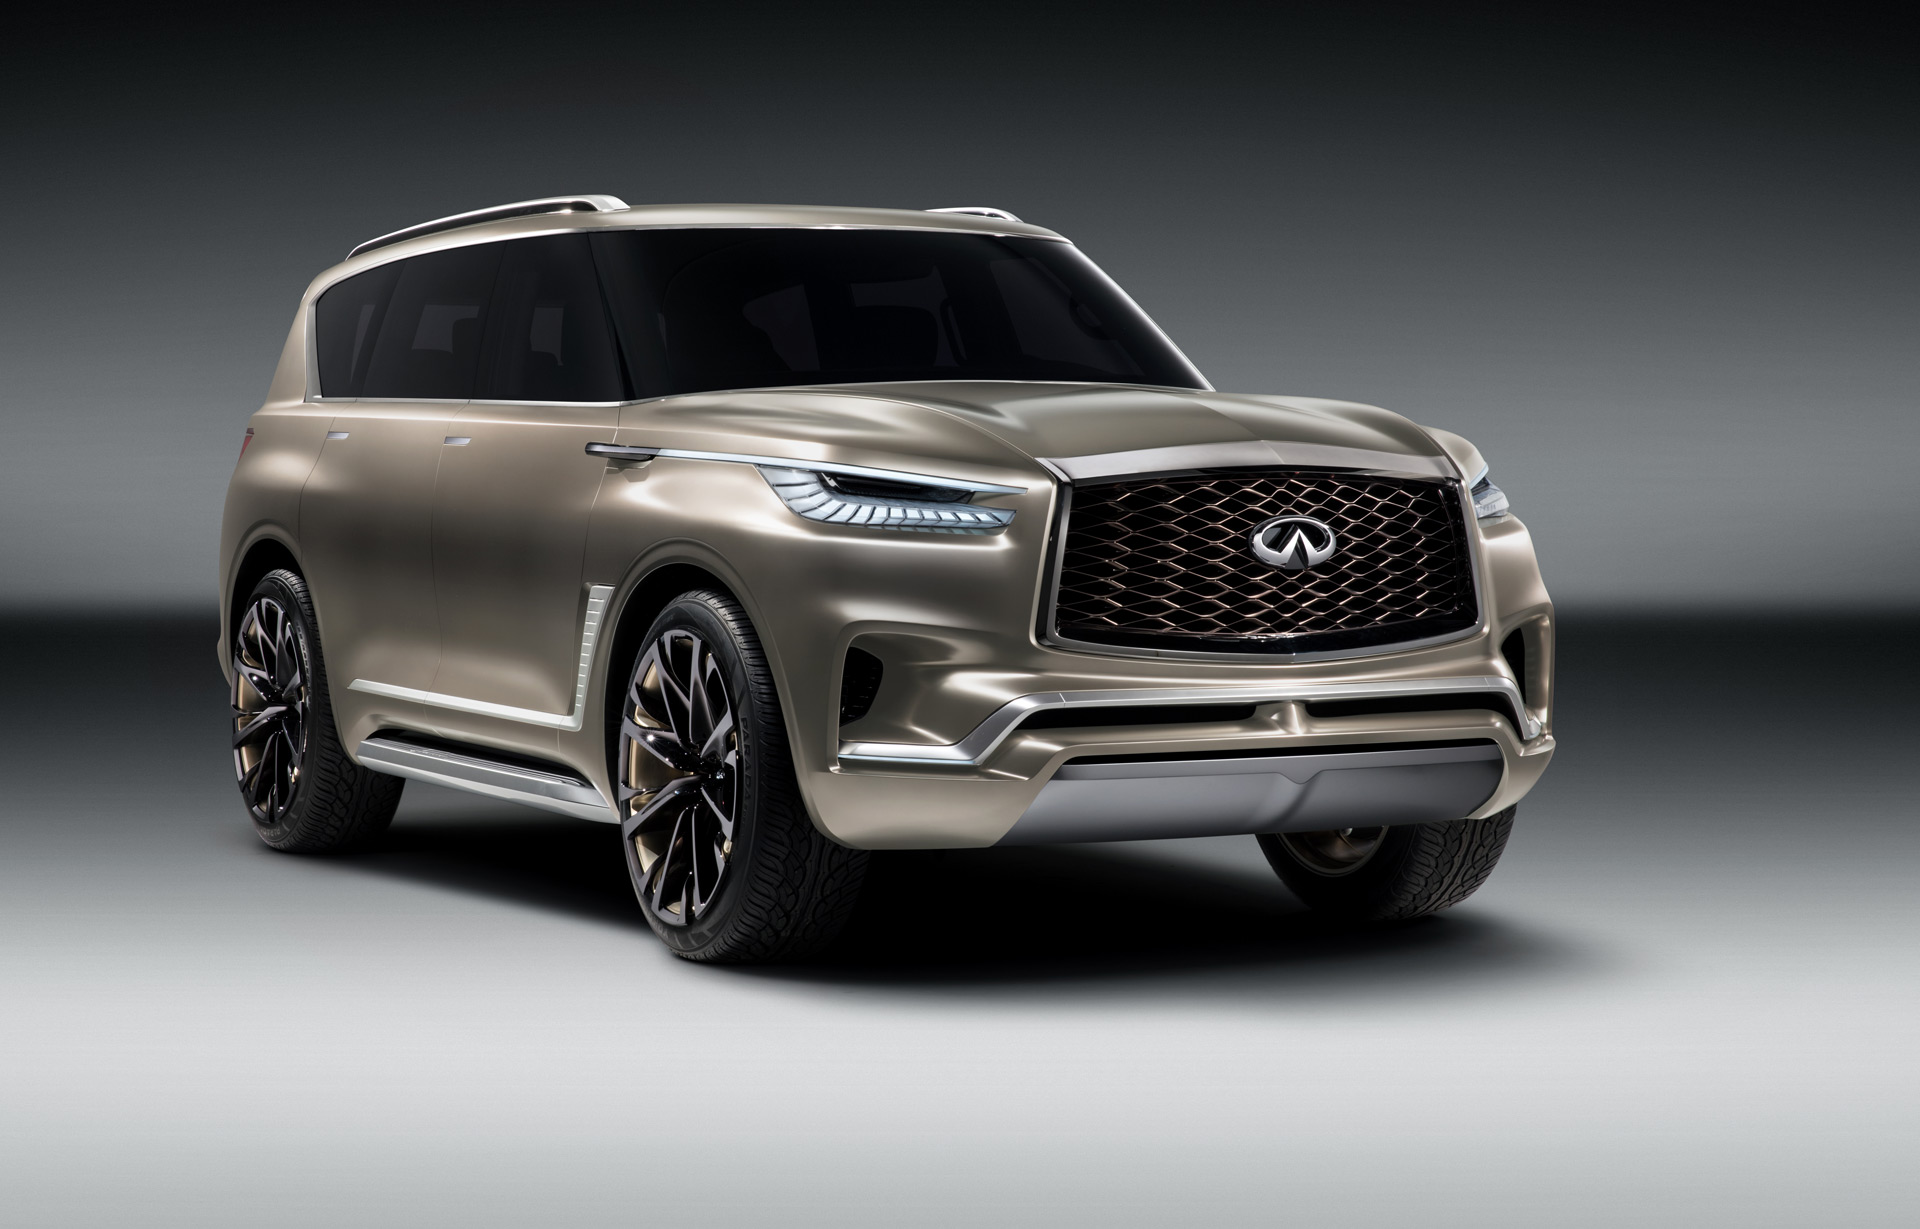 When will infiniti redesign the qx80